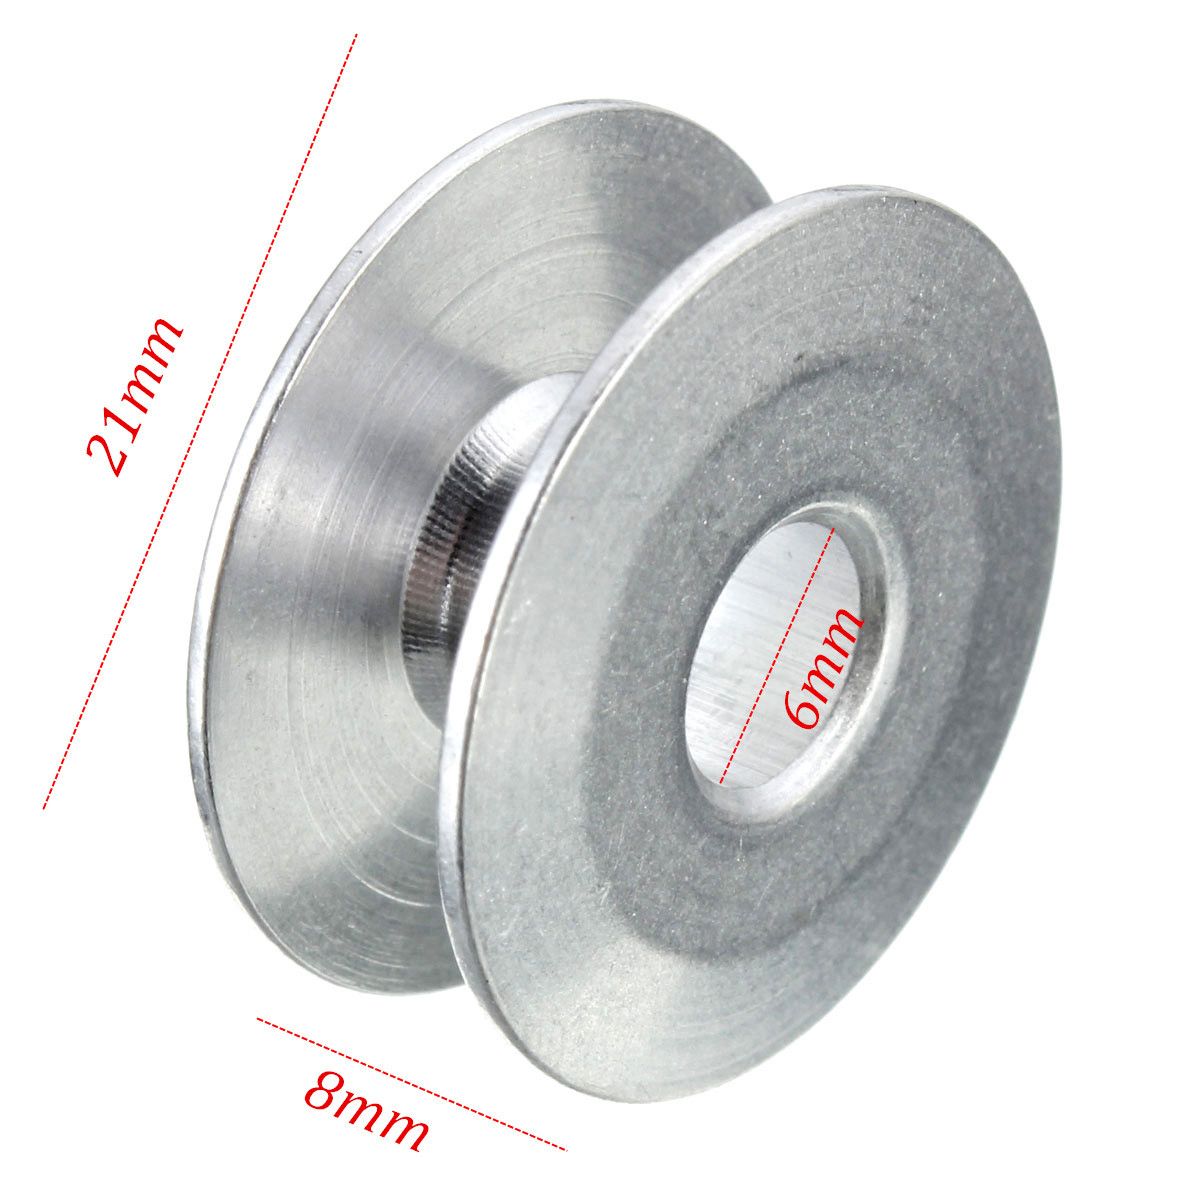 Aluminum-Industrial-Sewing-Machine-Bobbins-Fit-Singer-Brother-Tools-for-Single-Needle-Flat-Machine-1281956